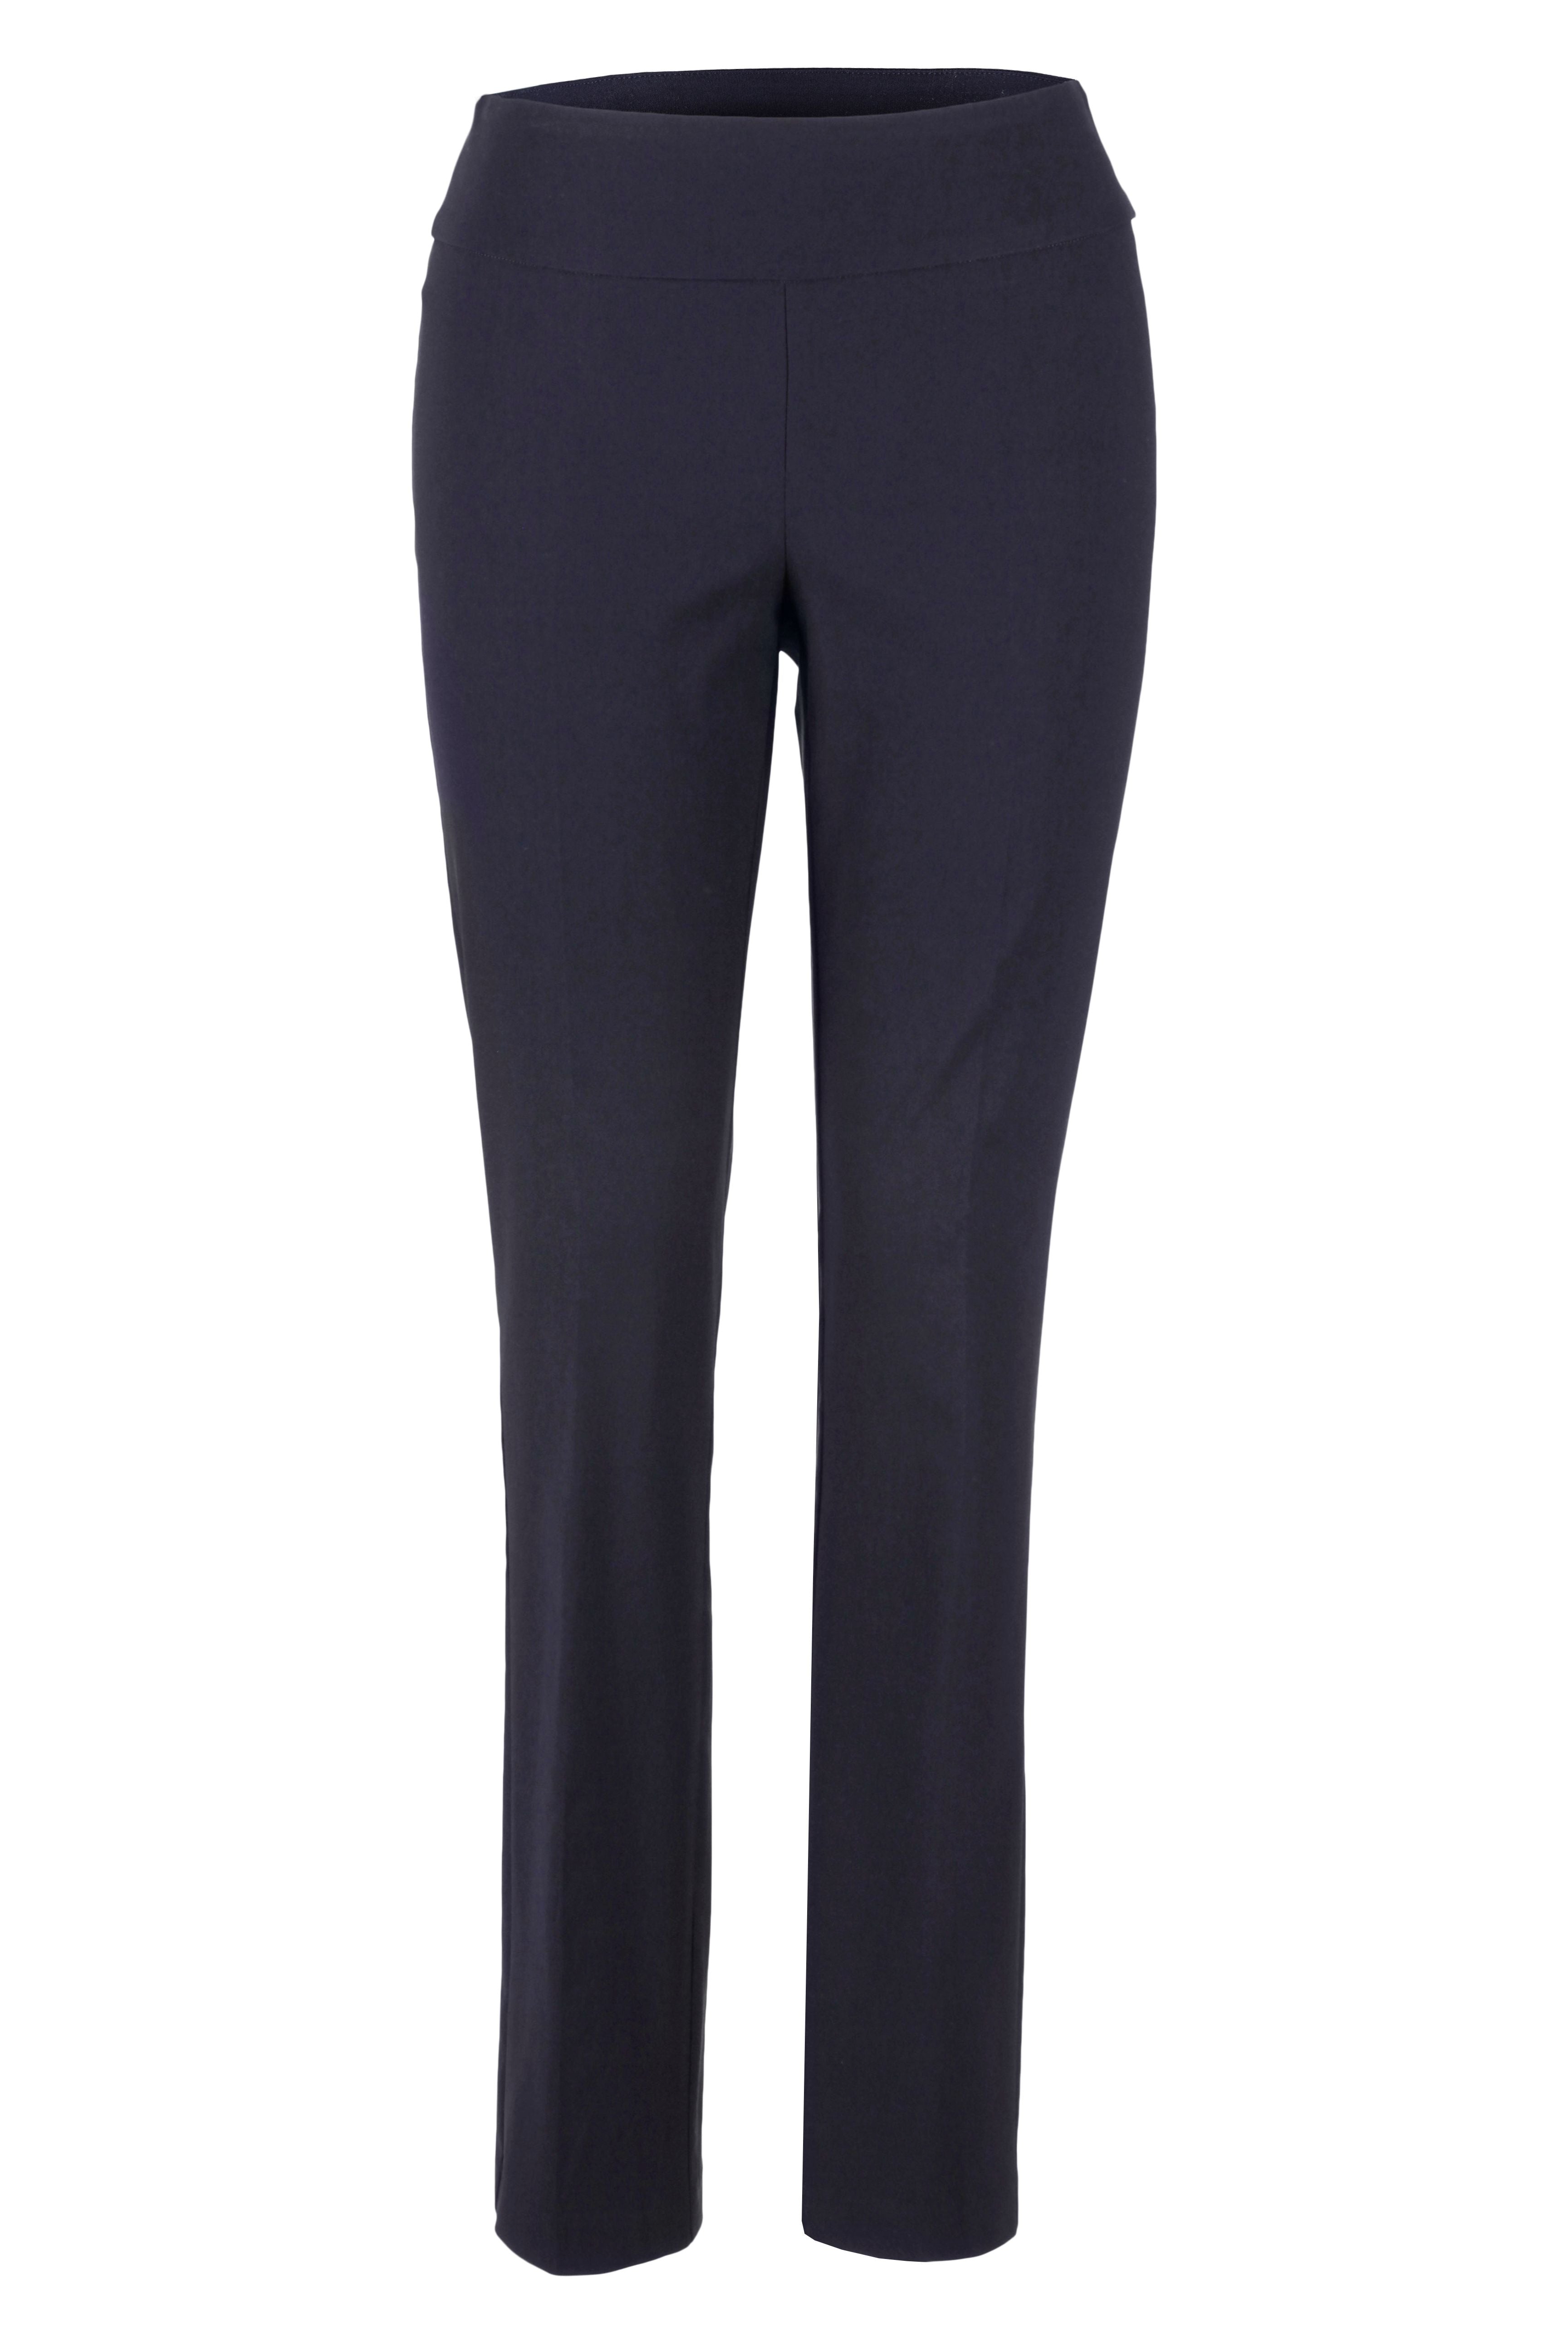 Up! Pant Solid Techno Full Length Navy  - 64562UP